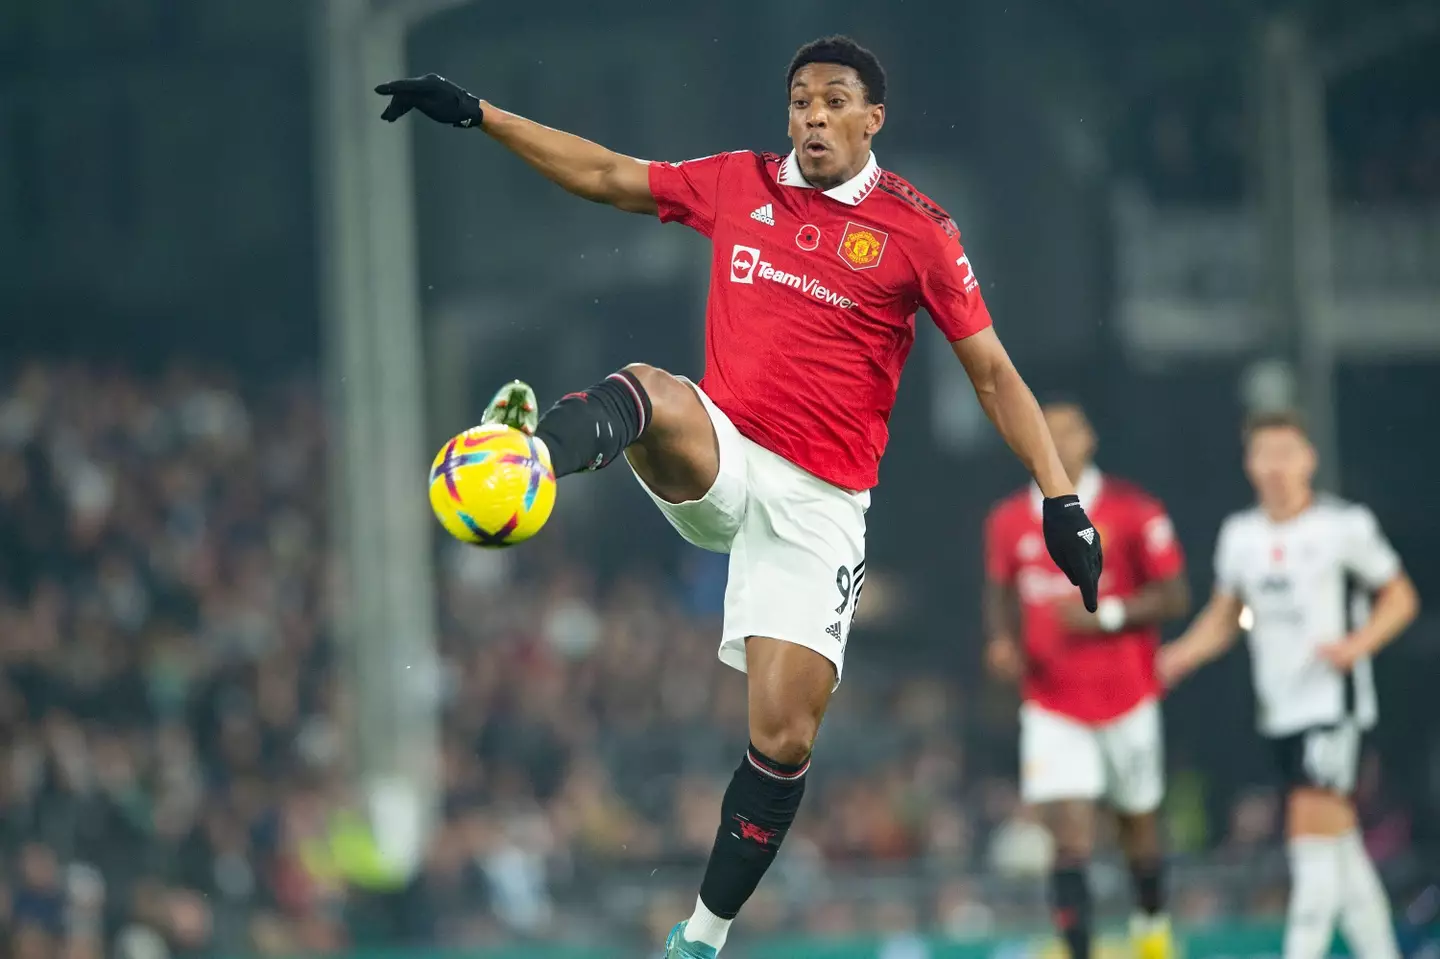 Martial in action during United's 2-1 win over Fulham on Sunday. (Image